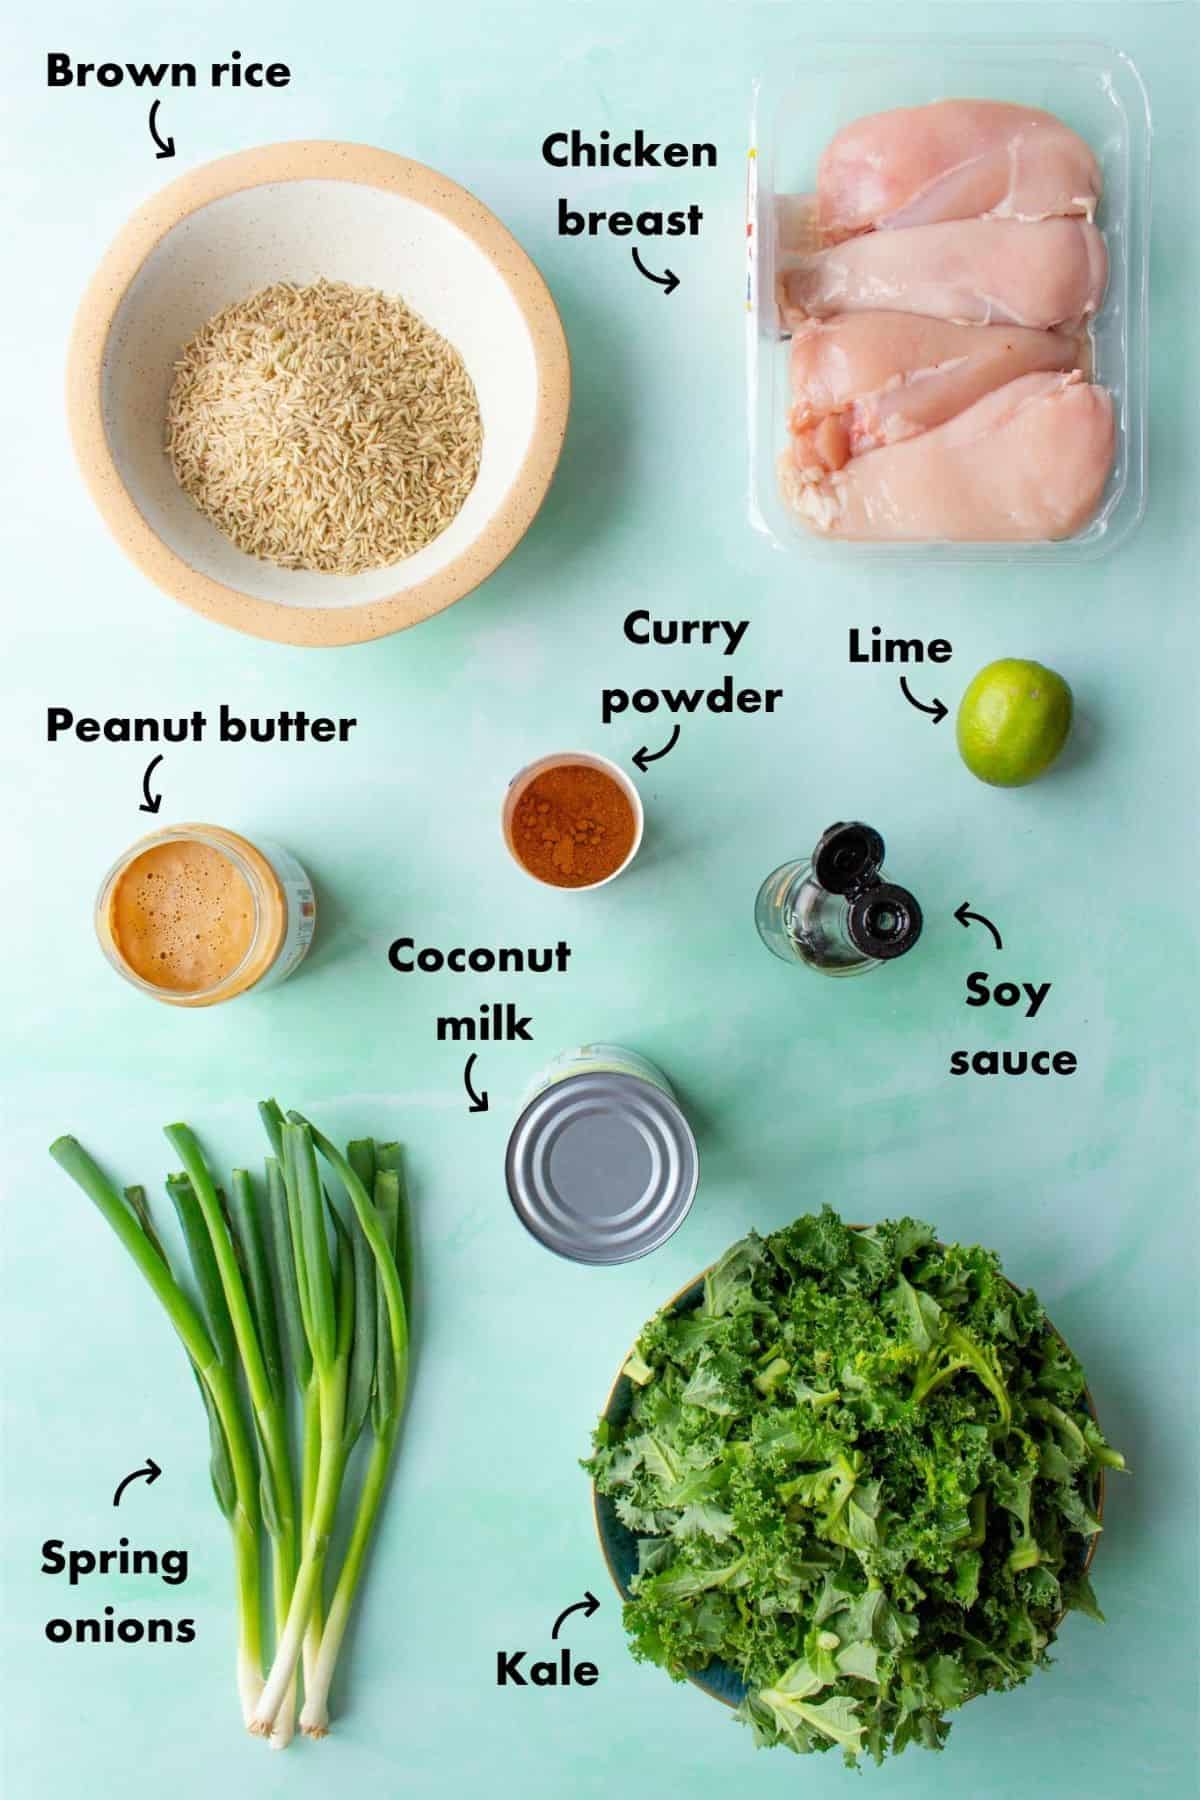 Ingredients to make Peanut Butter Chicken Satay Curry laid out on a pale blue background and labelled.